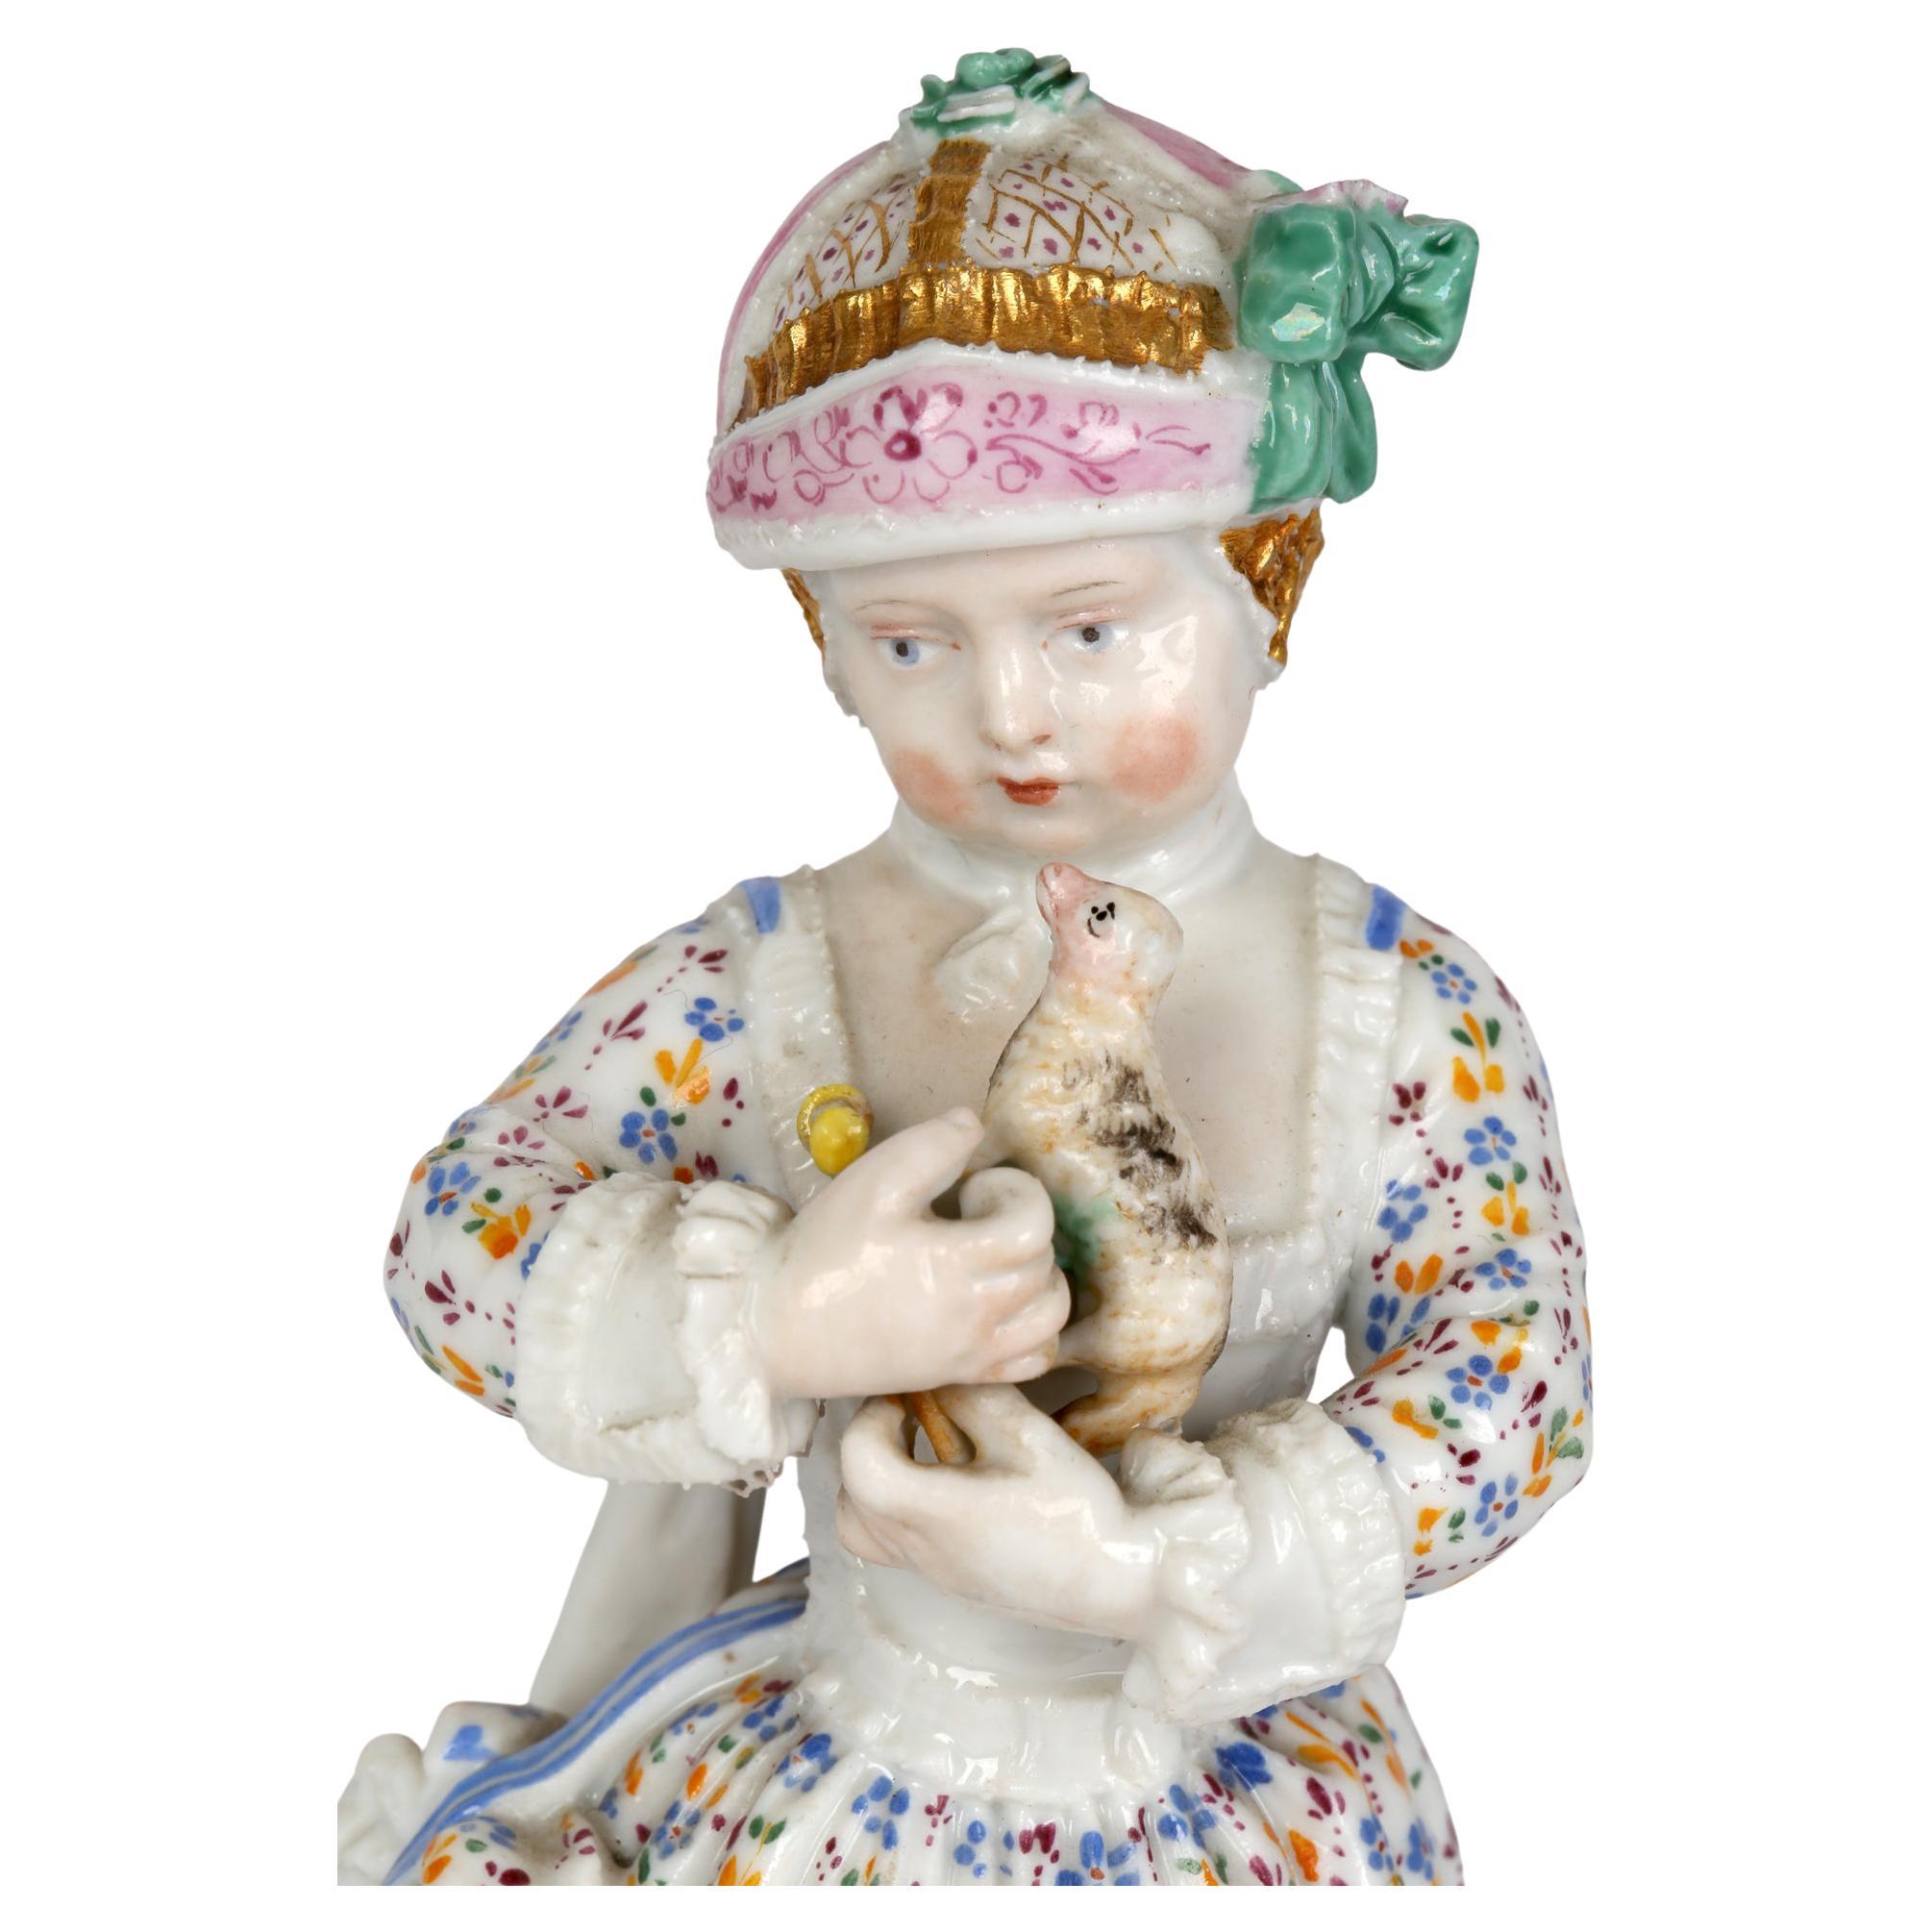 A fine and charming German porcelain figurine of a young girl holding a pull along animal toy dating from the mid 19th century. This delightful figurine is beautifully detailed standing a rounded base molded in relief with scroll designs highlighted